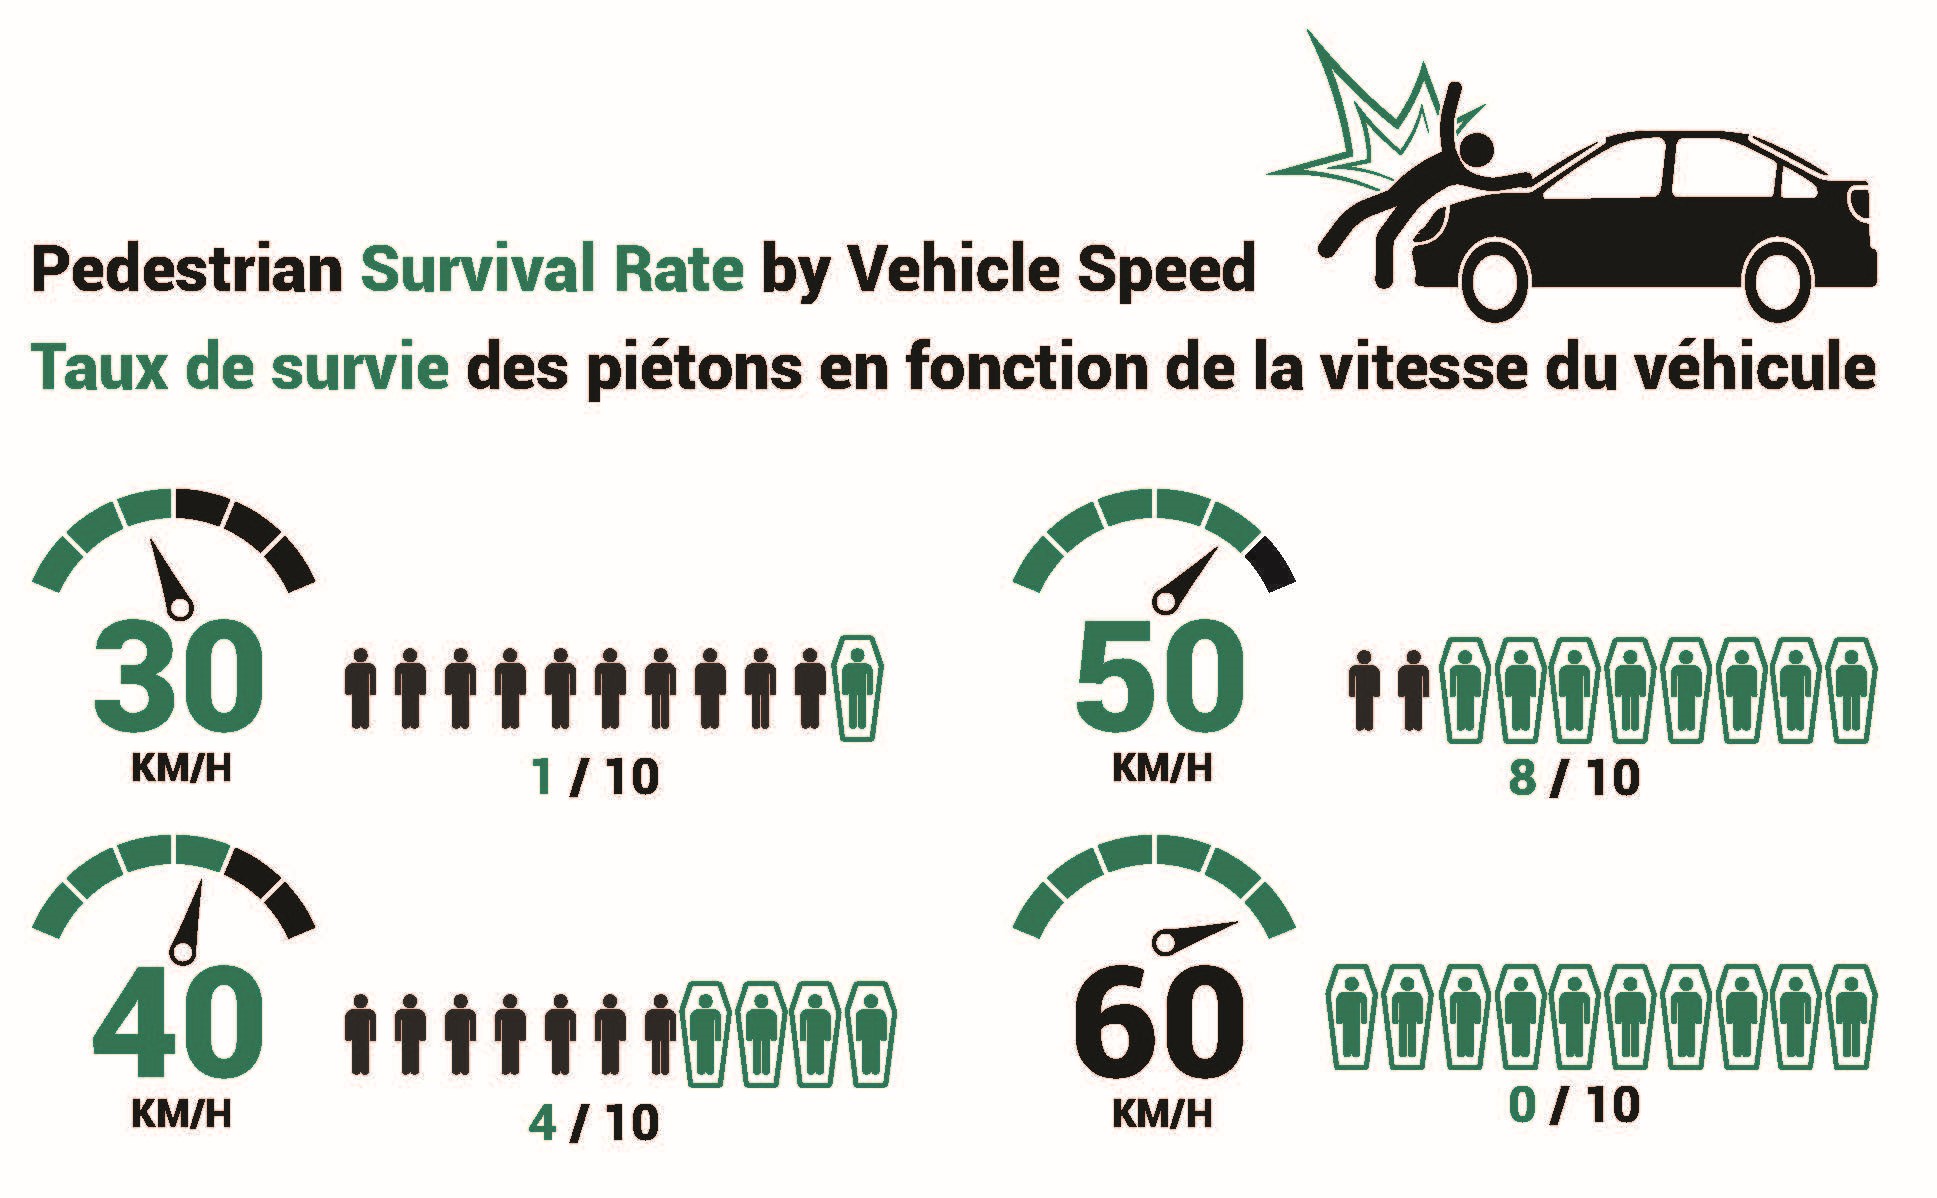 pedestrian survival rate by vehicle speed graphic